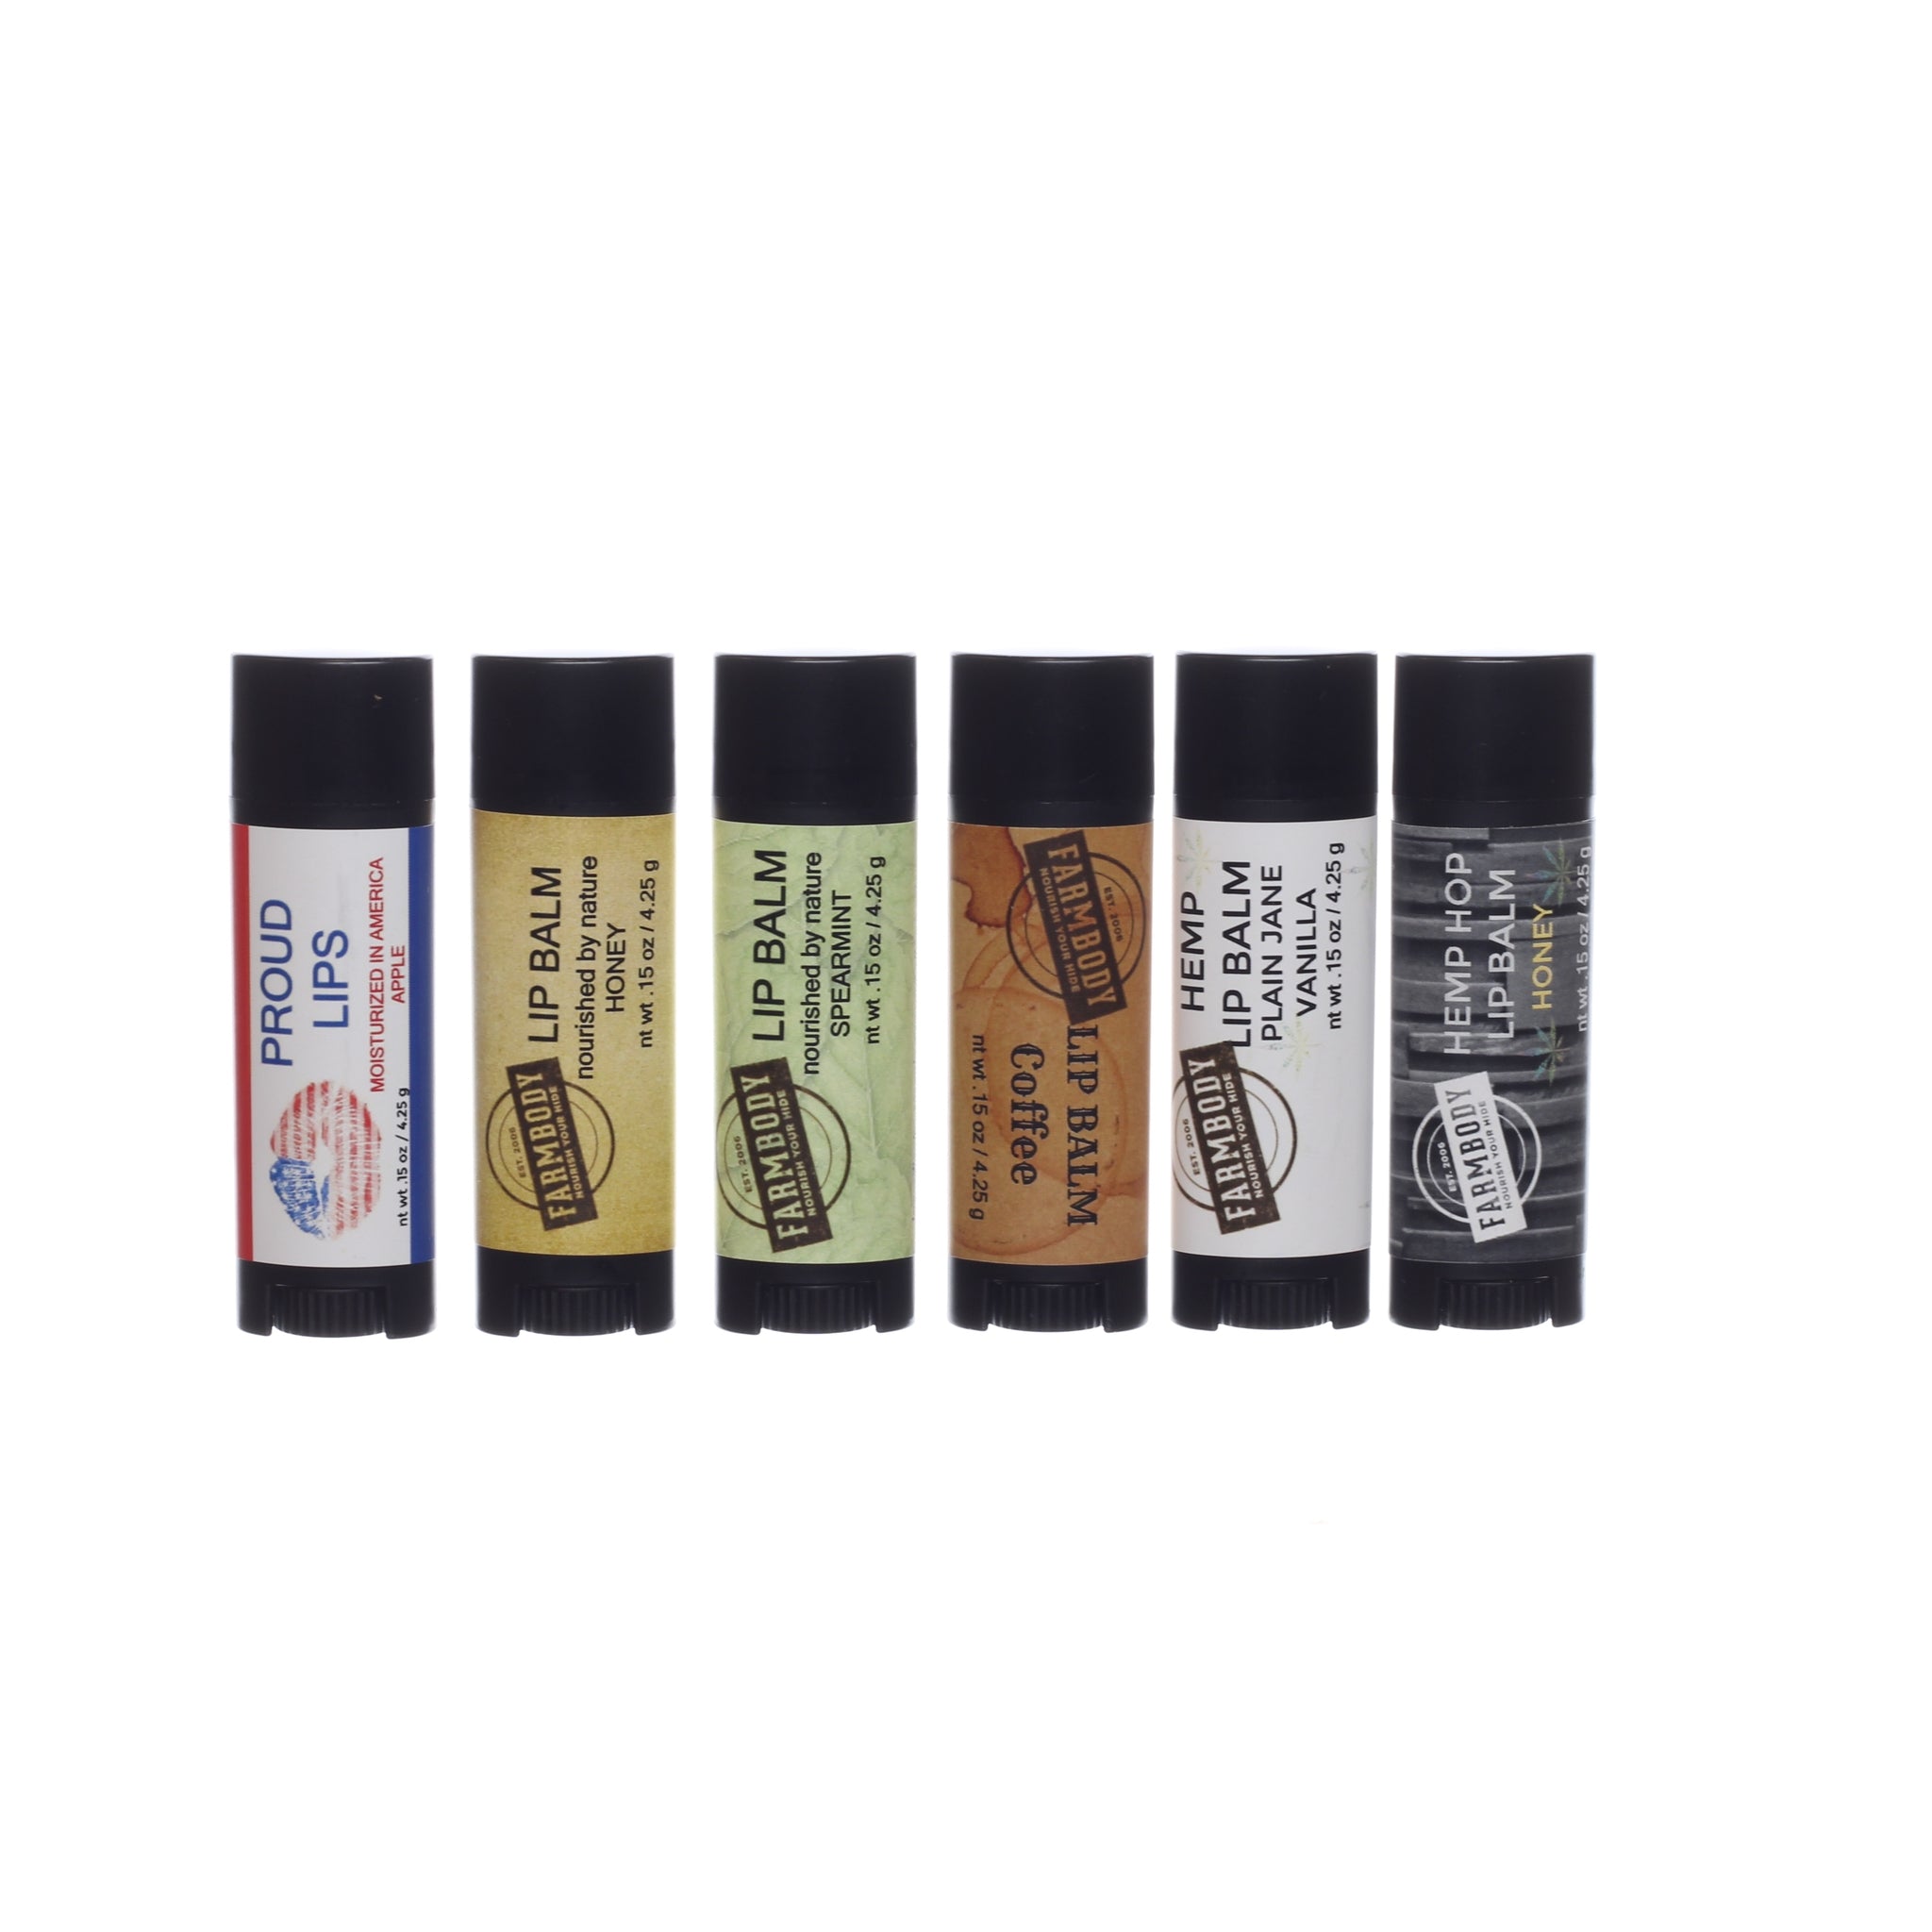 Farmbody Lip Balm Collection Nourished by Nature